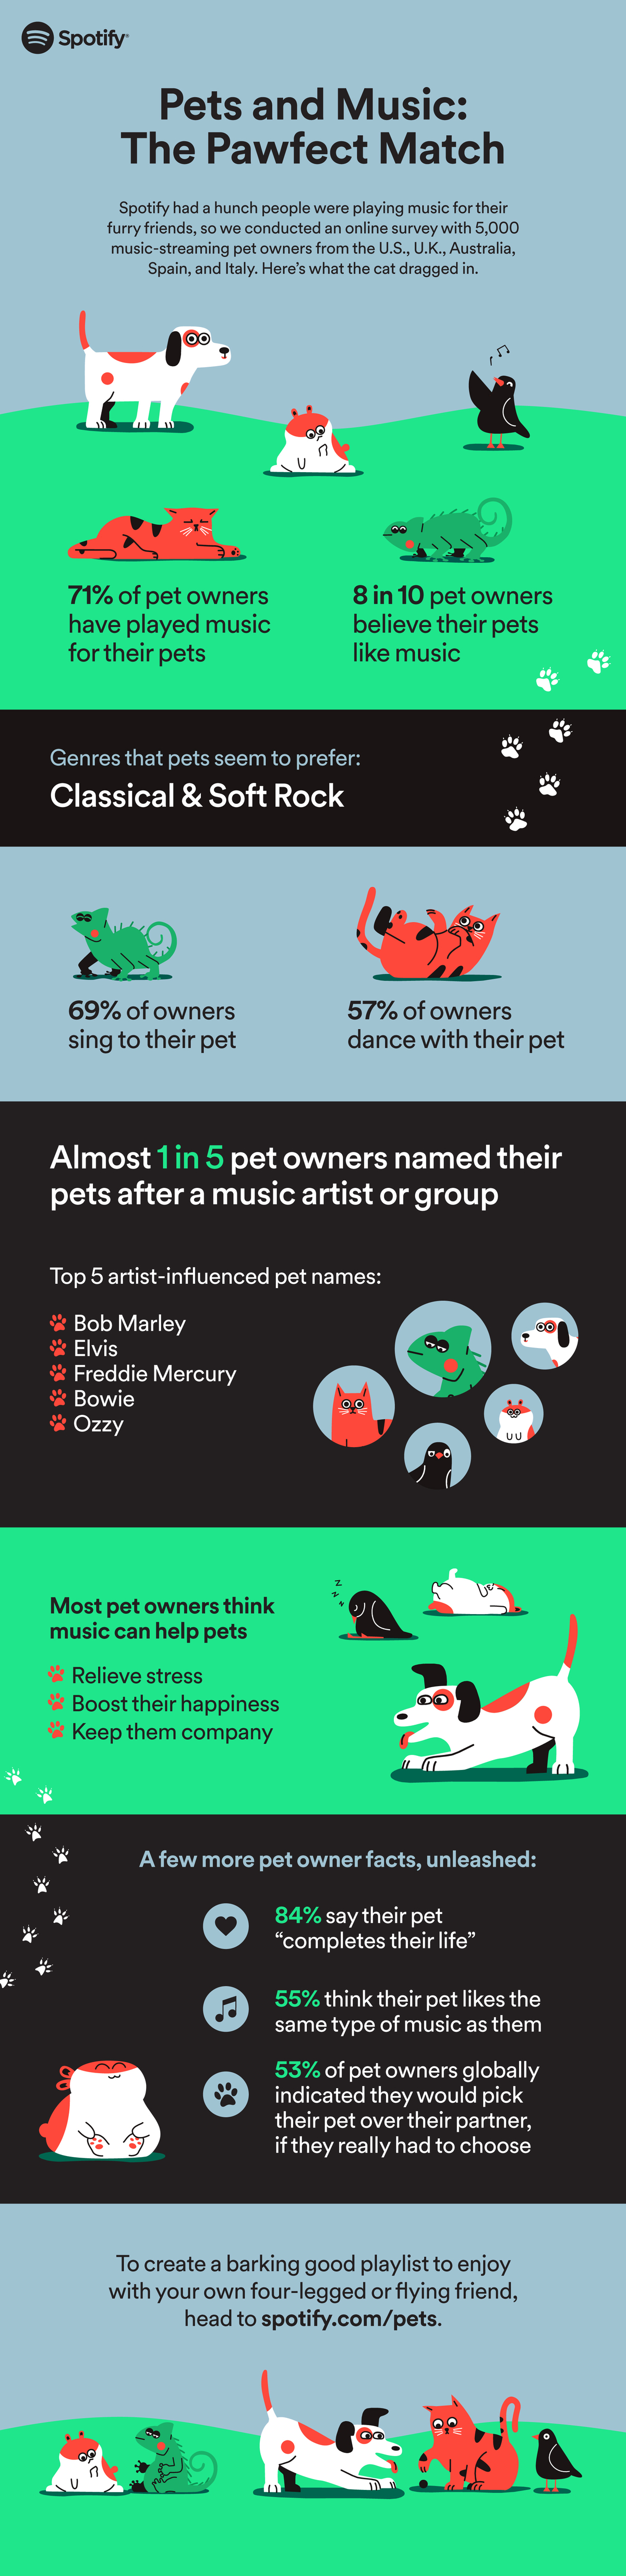 Spotify Launches Playlist Generator for Pets